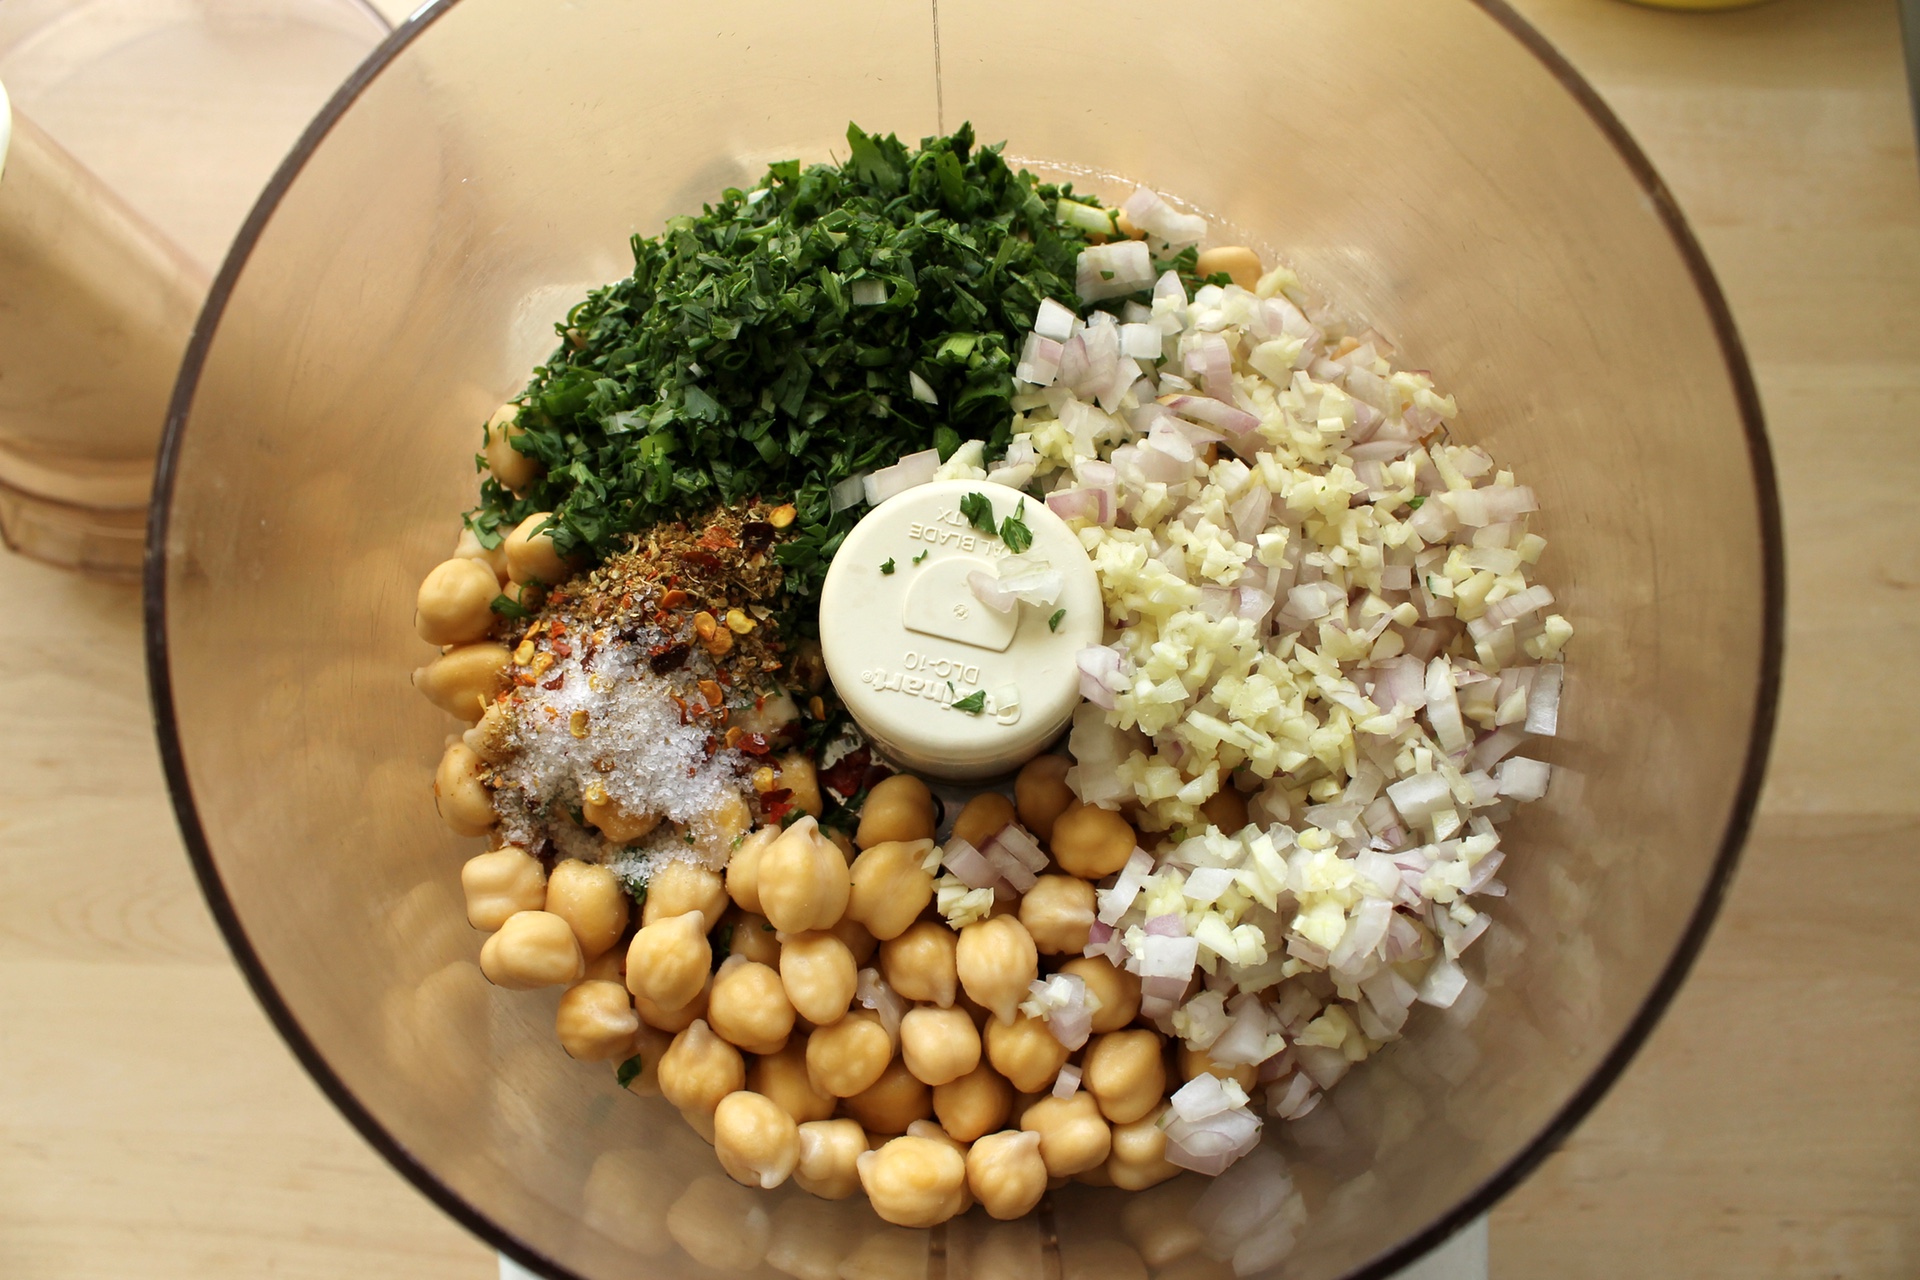  Combine the chickpeas with spices and minced aromatics.